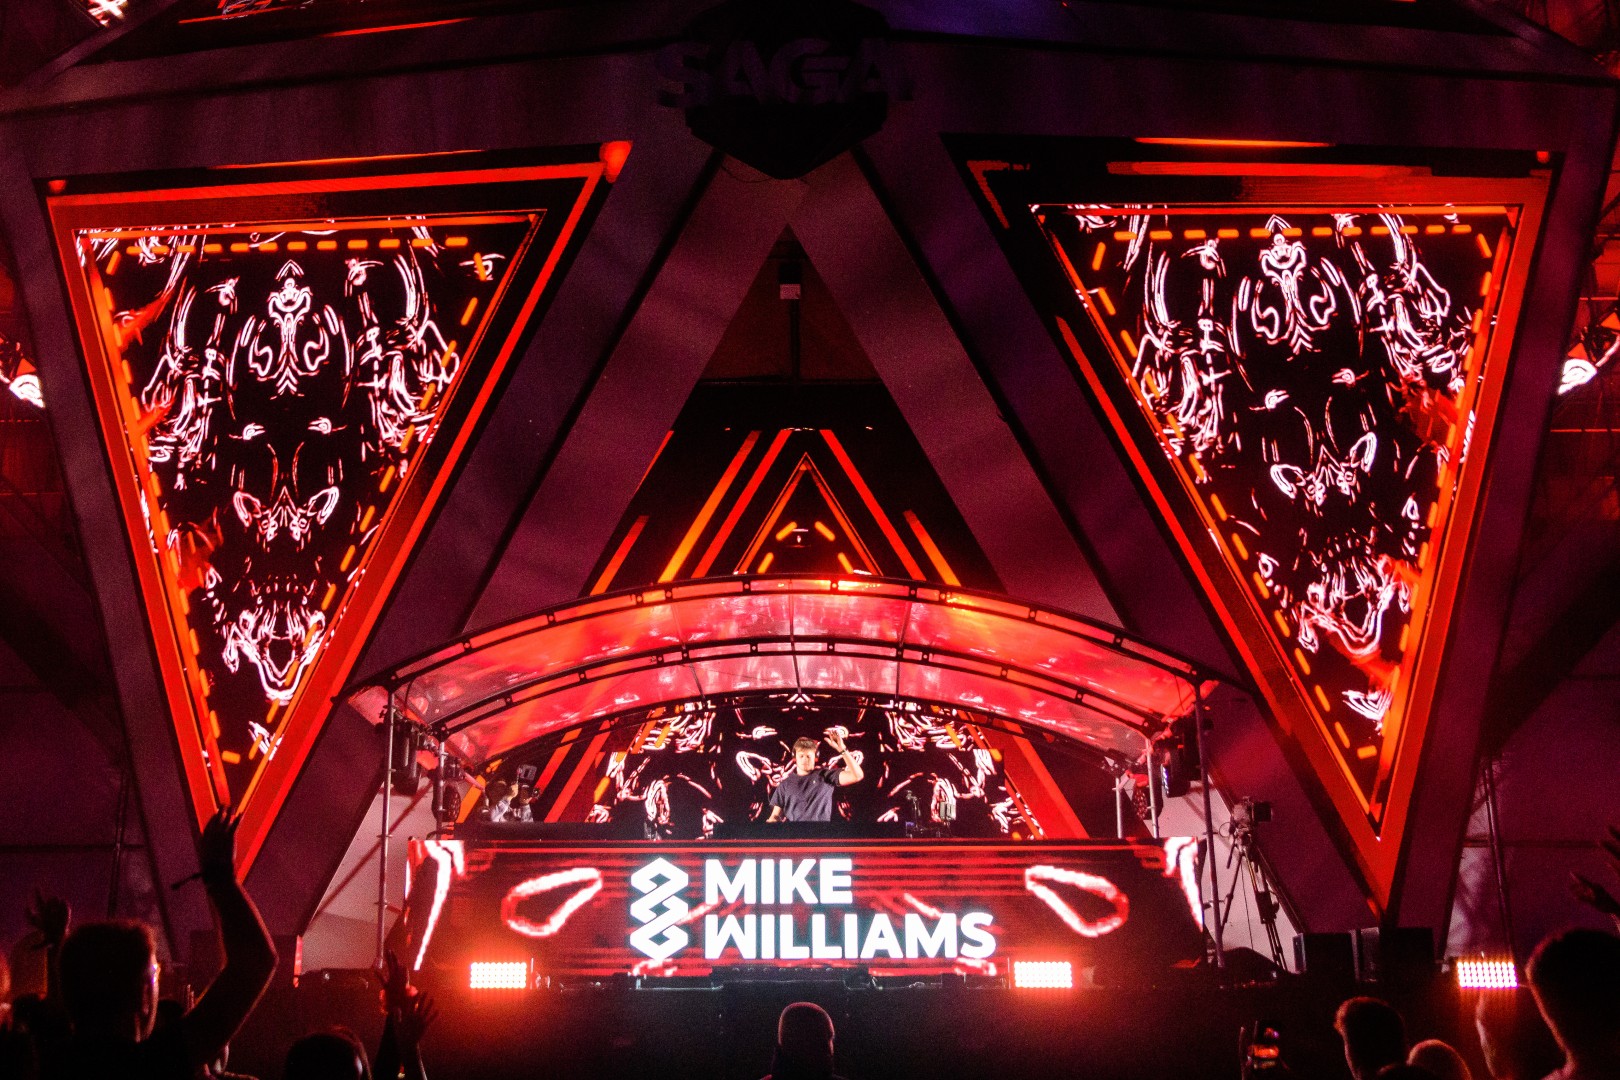 Mike Williams at Romaero in Bucharest on September 11, 2021 (453291a4ff)